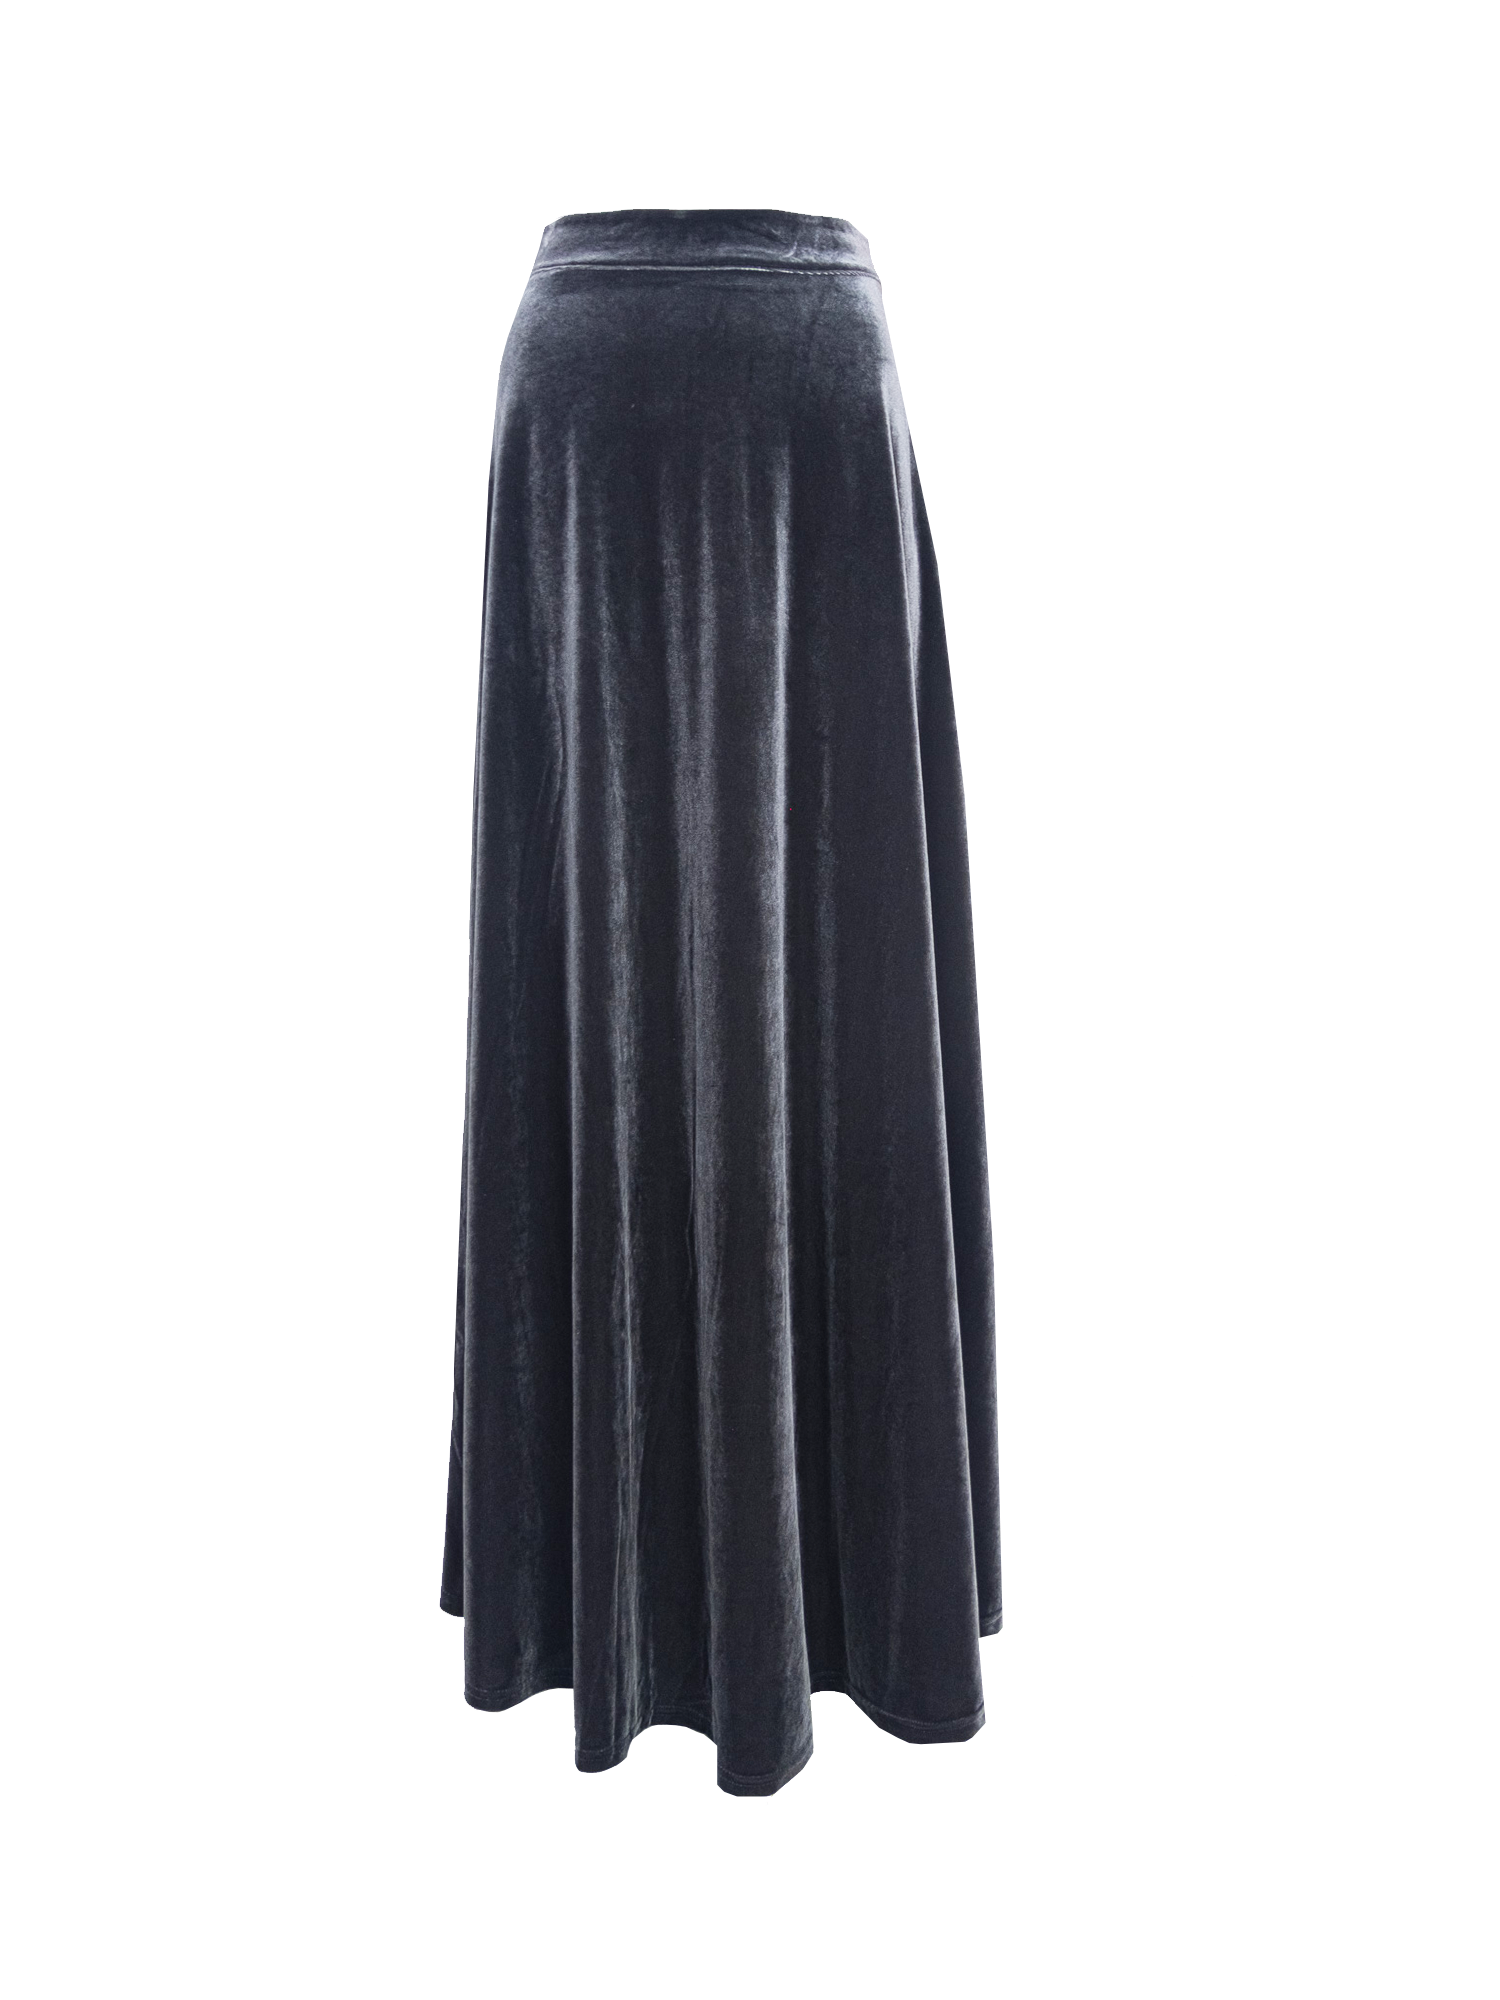 TOSCA - long skirt in grey chenille